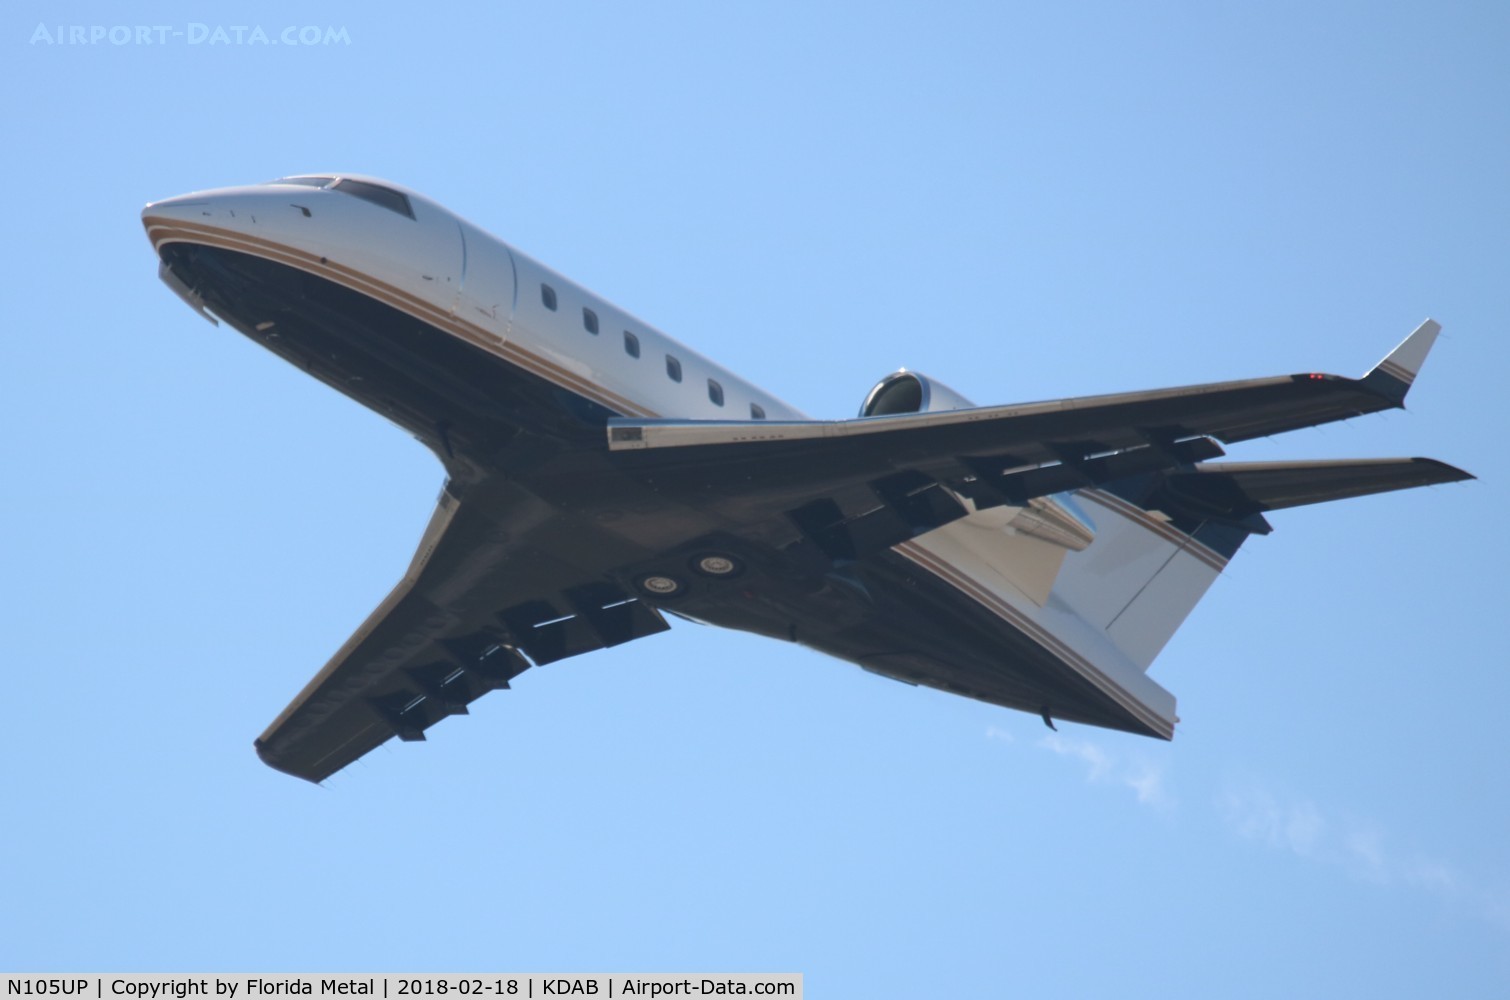 N105UP, 1987 Canadair Challenger 601 (CL-600-2A12) C/N 3066, Challenger 601 zx